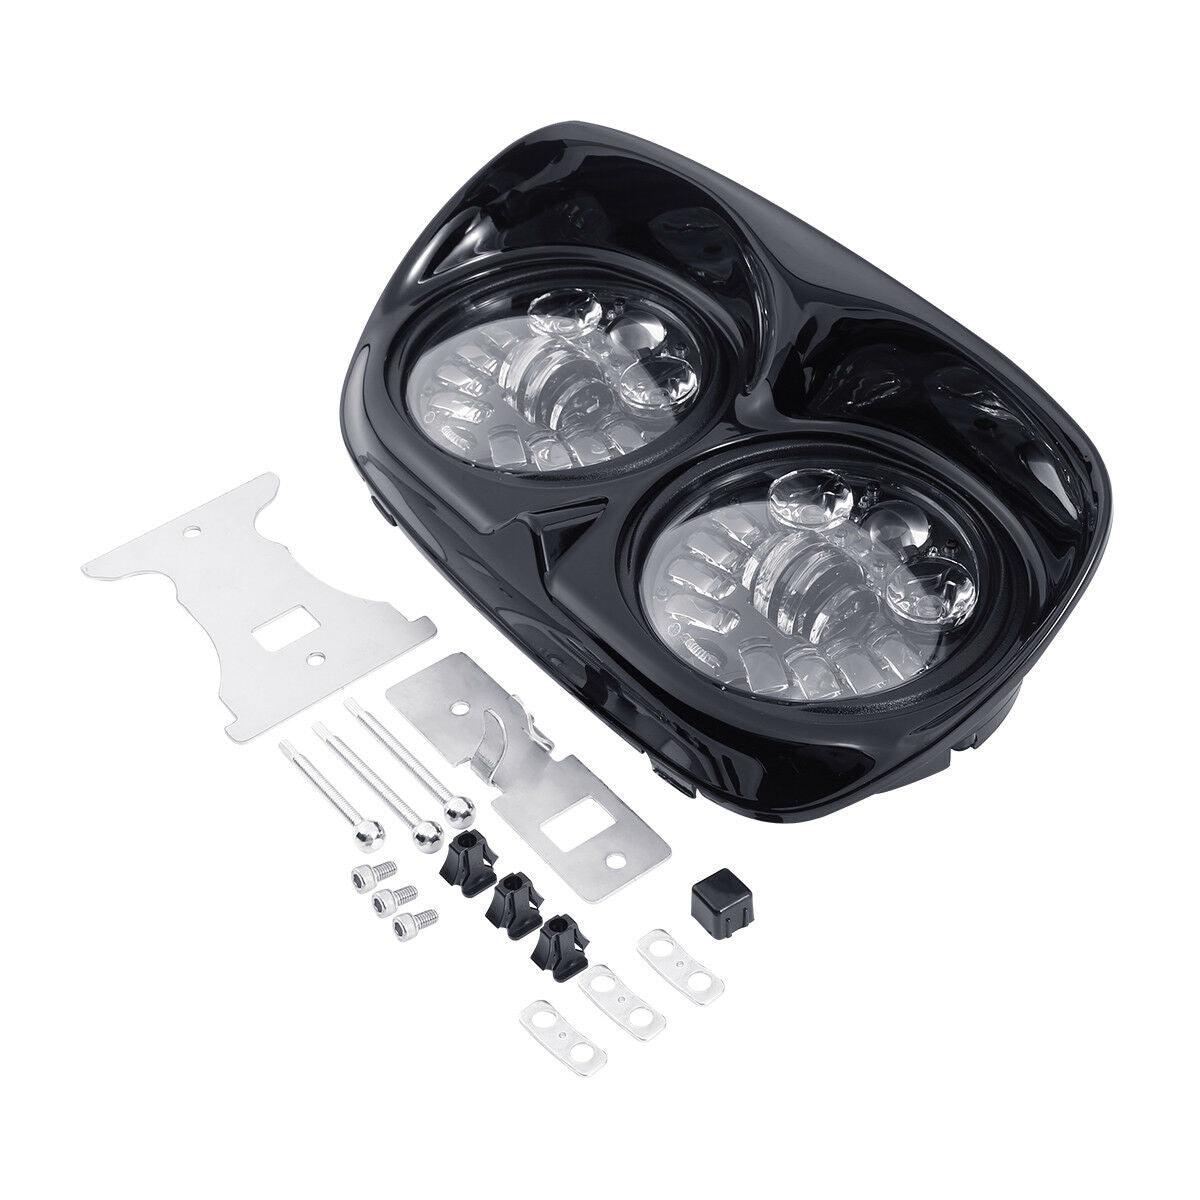 5-1/2" LED Headlight Headlamp Assembly Fit For Harley Road Glide FLTR 98-13 - Moto Life Products